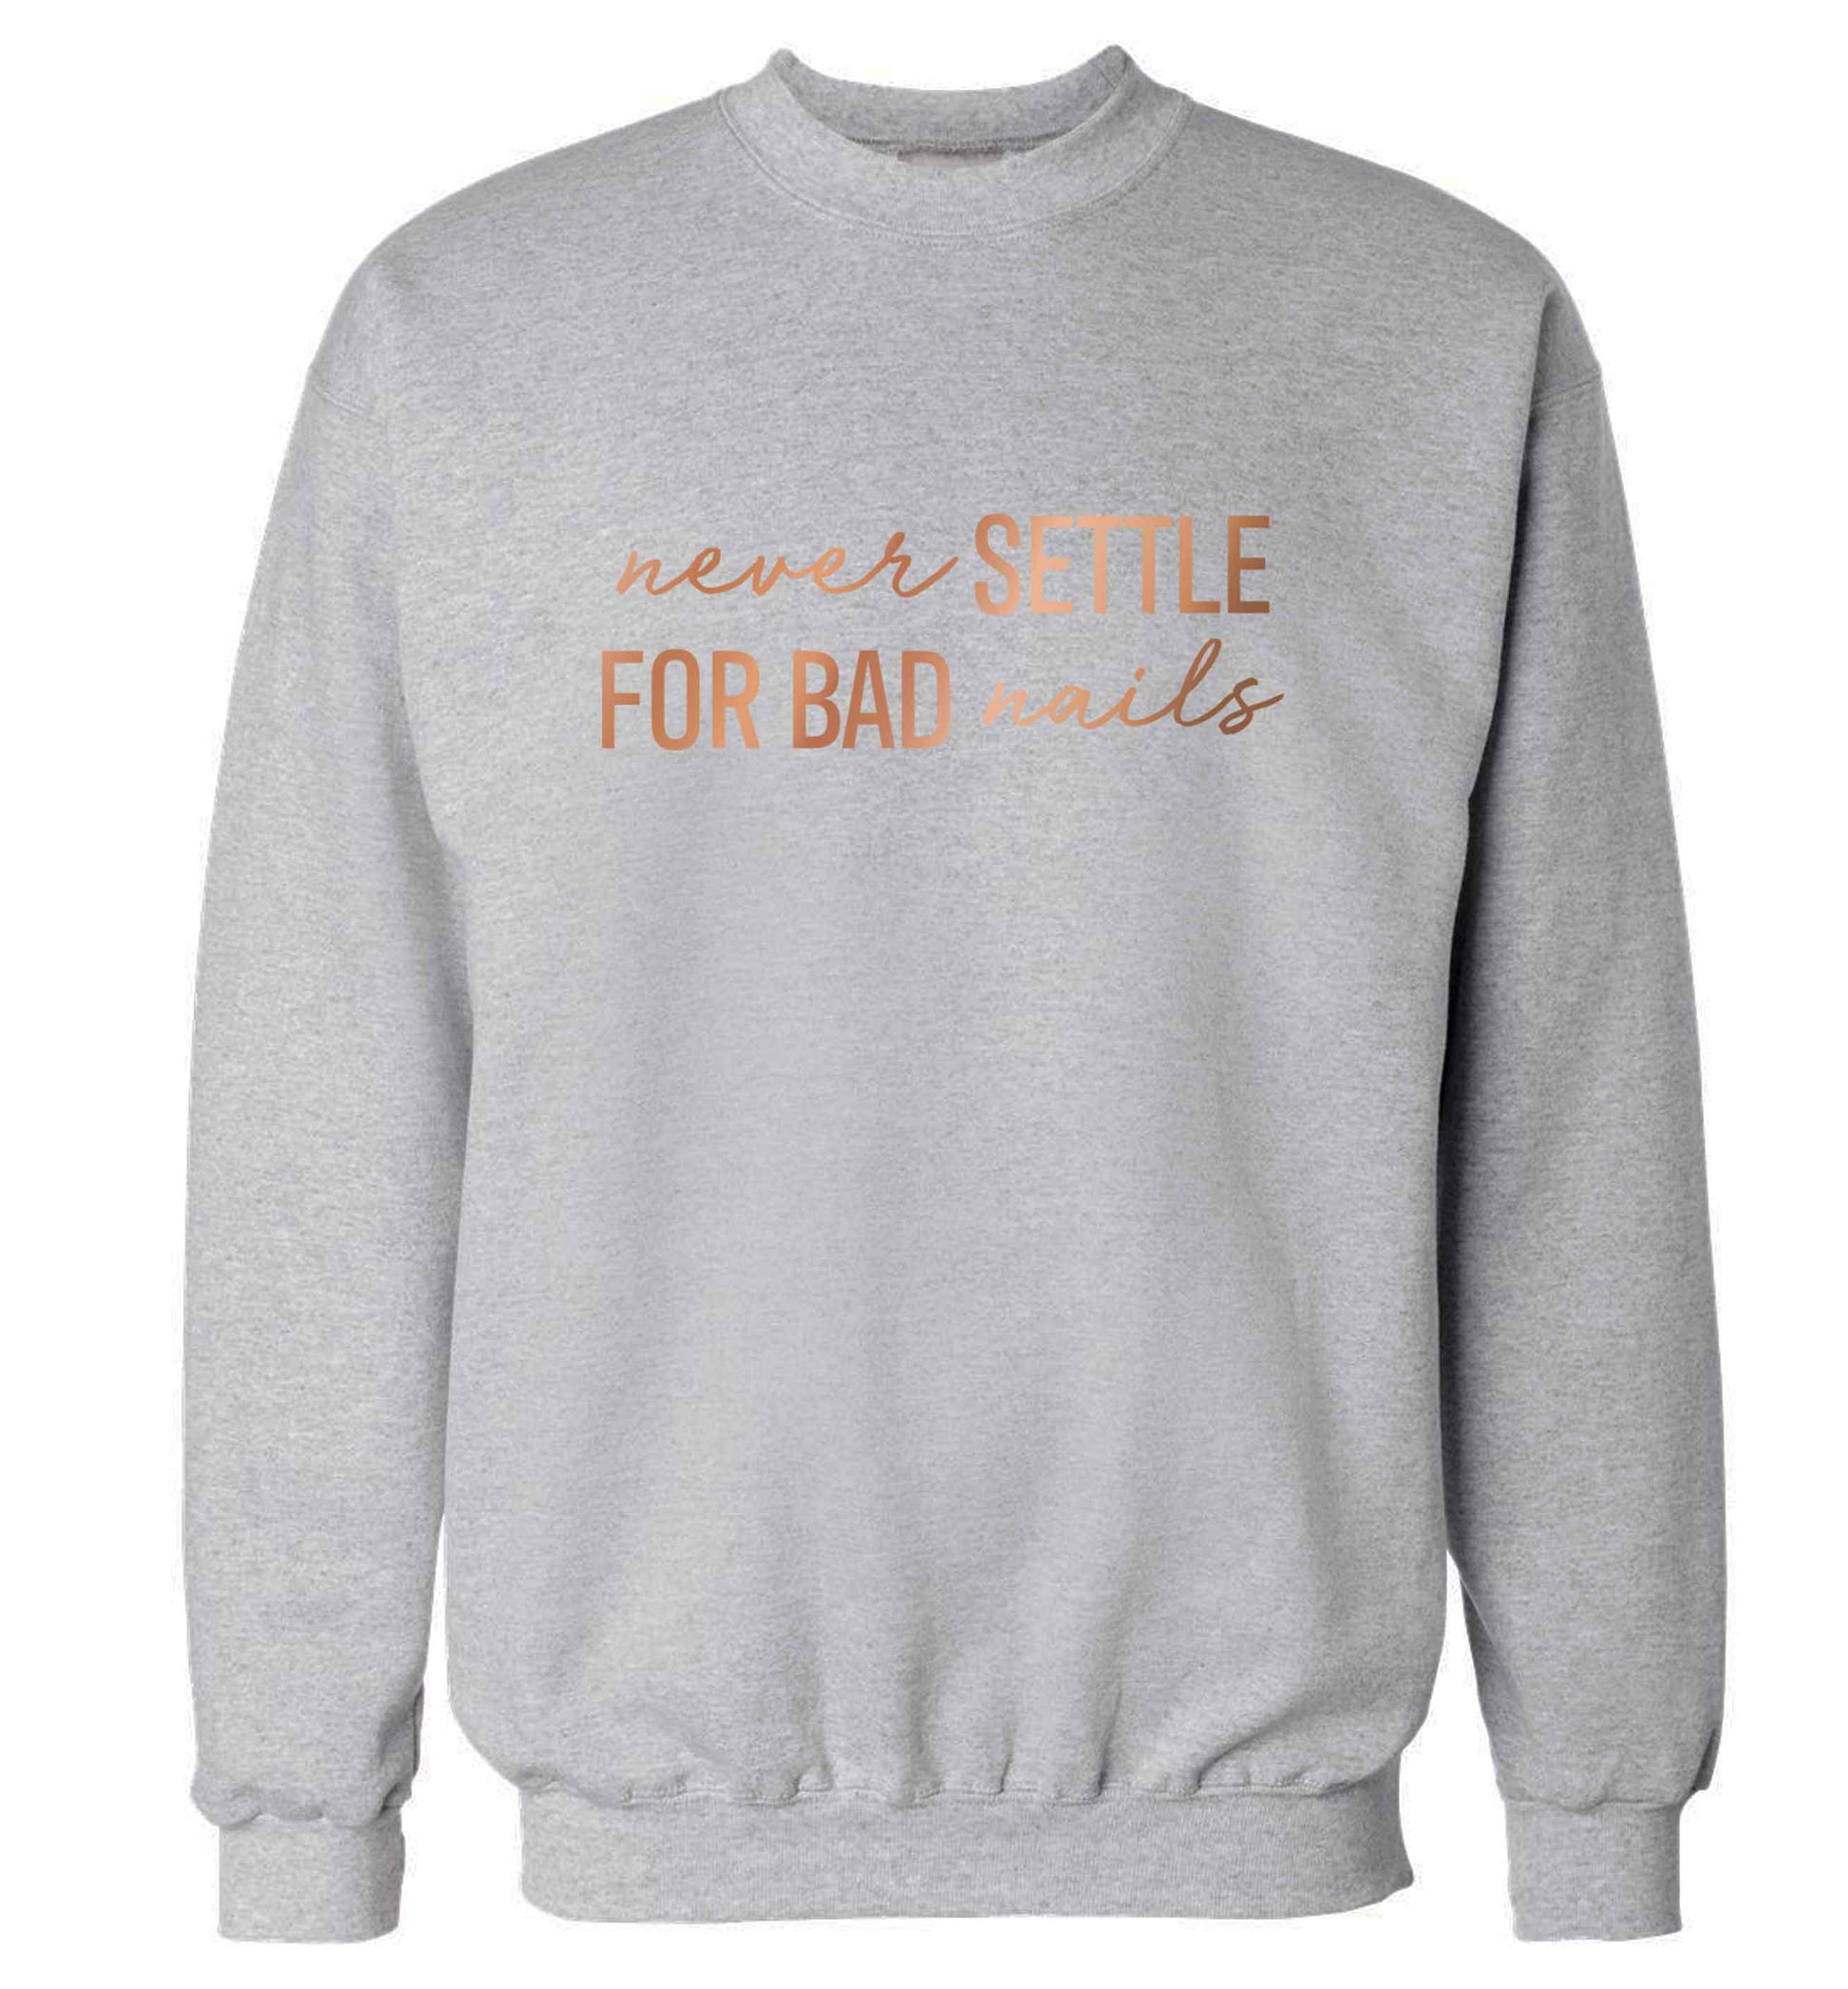 Never settle for bad nails - rose gold adult's unisex grey sweater 2XL